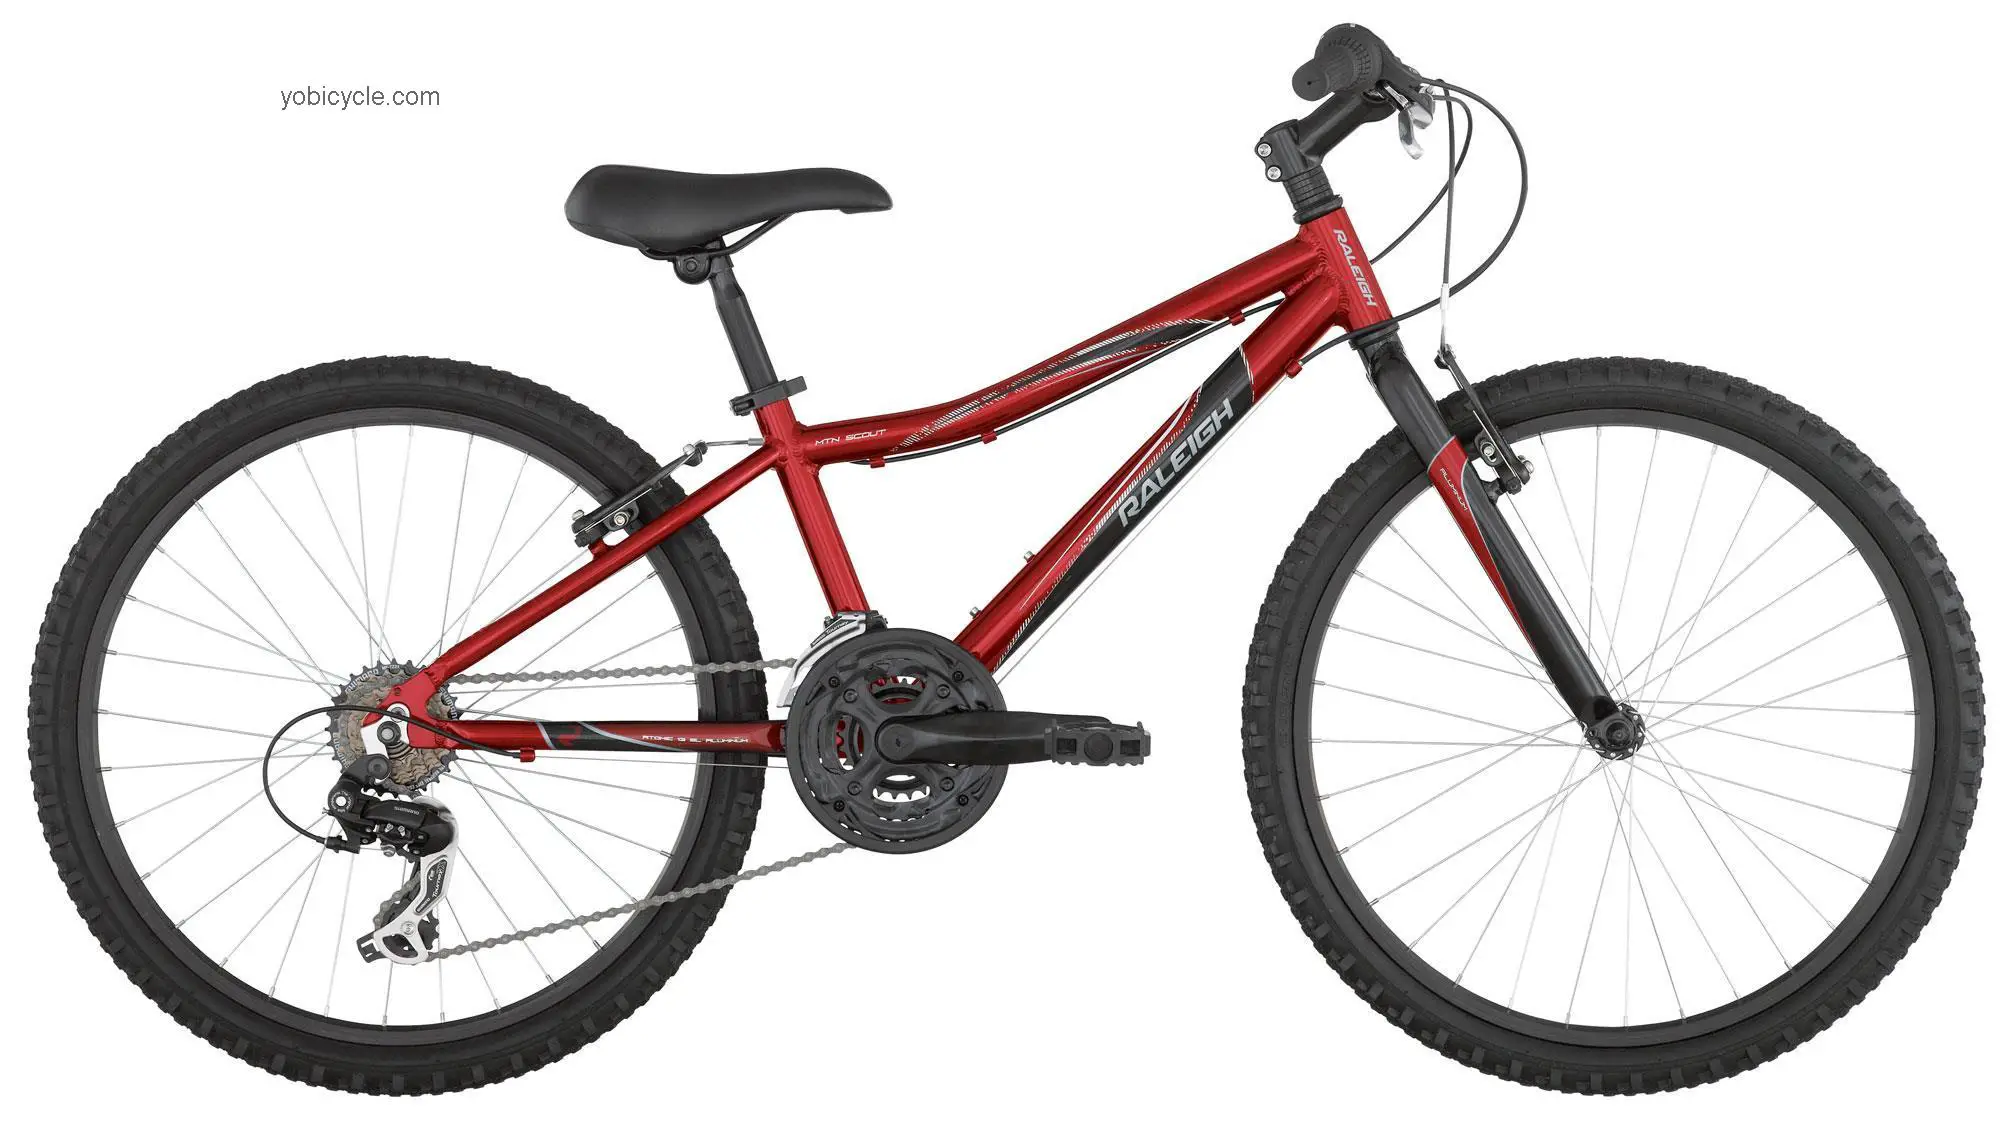 Raleigh MTN Scout competitors and comparison tool online specs and performance